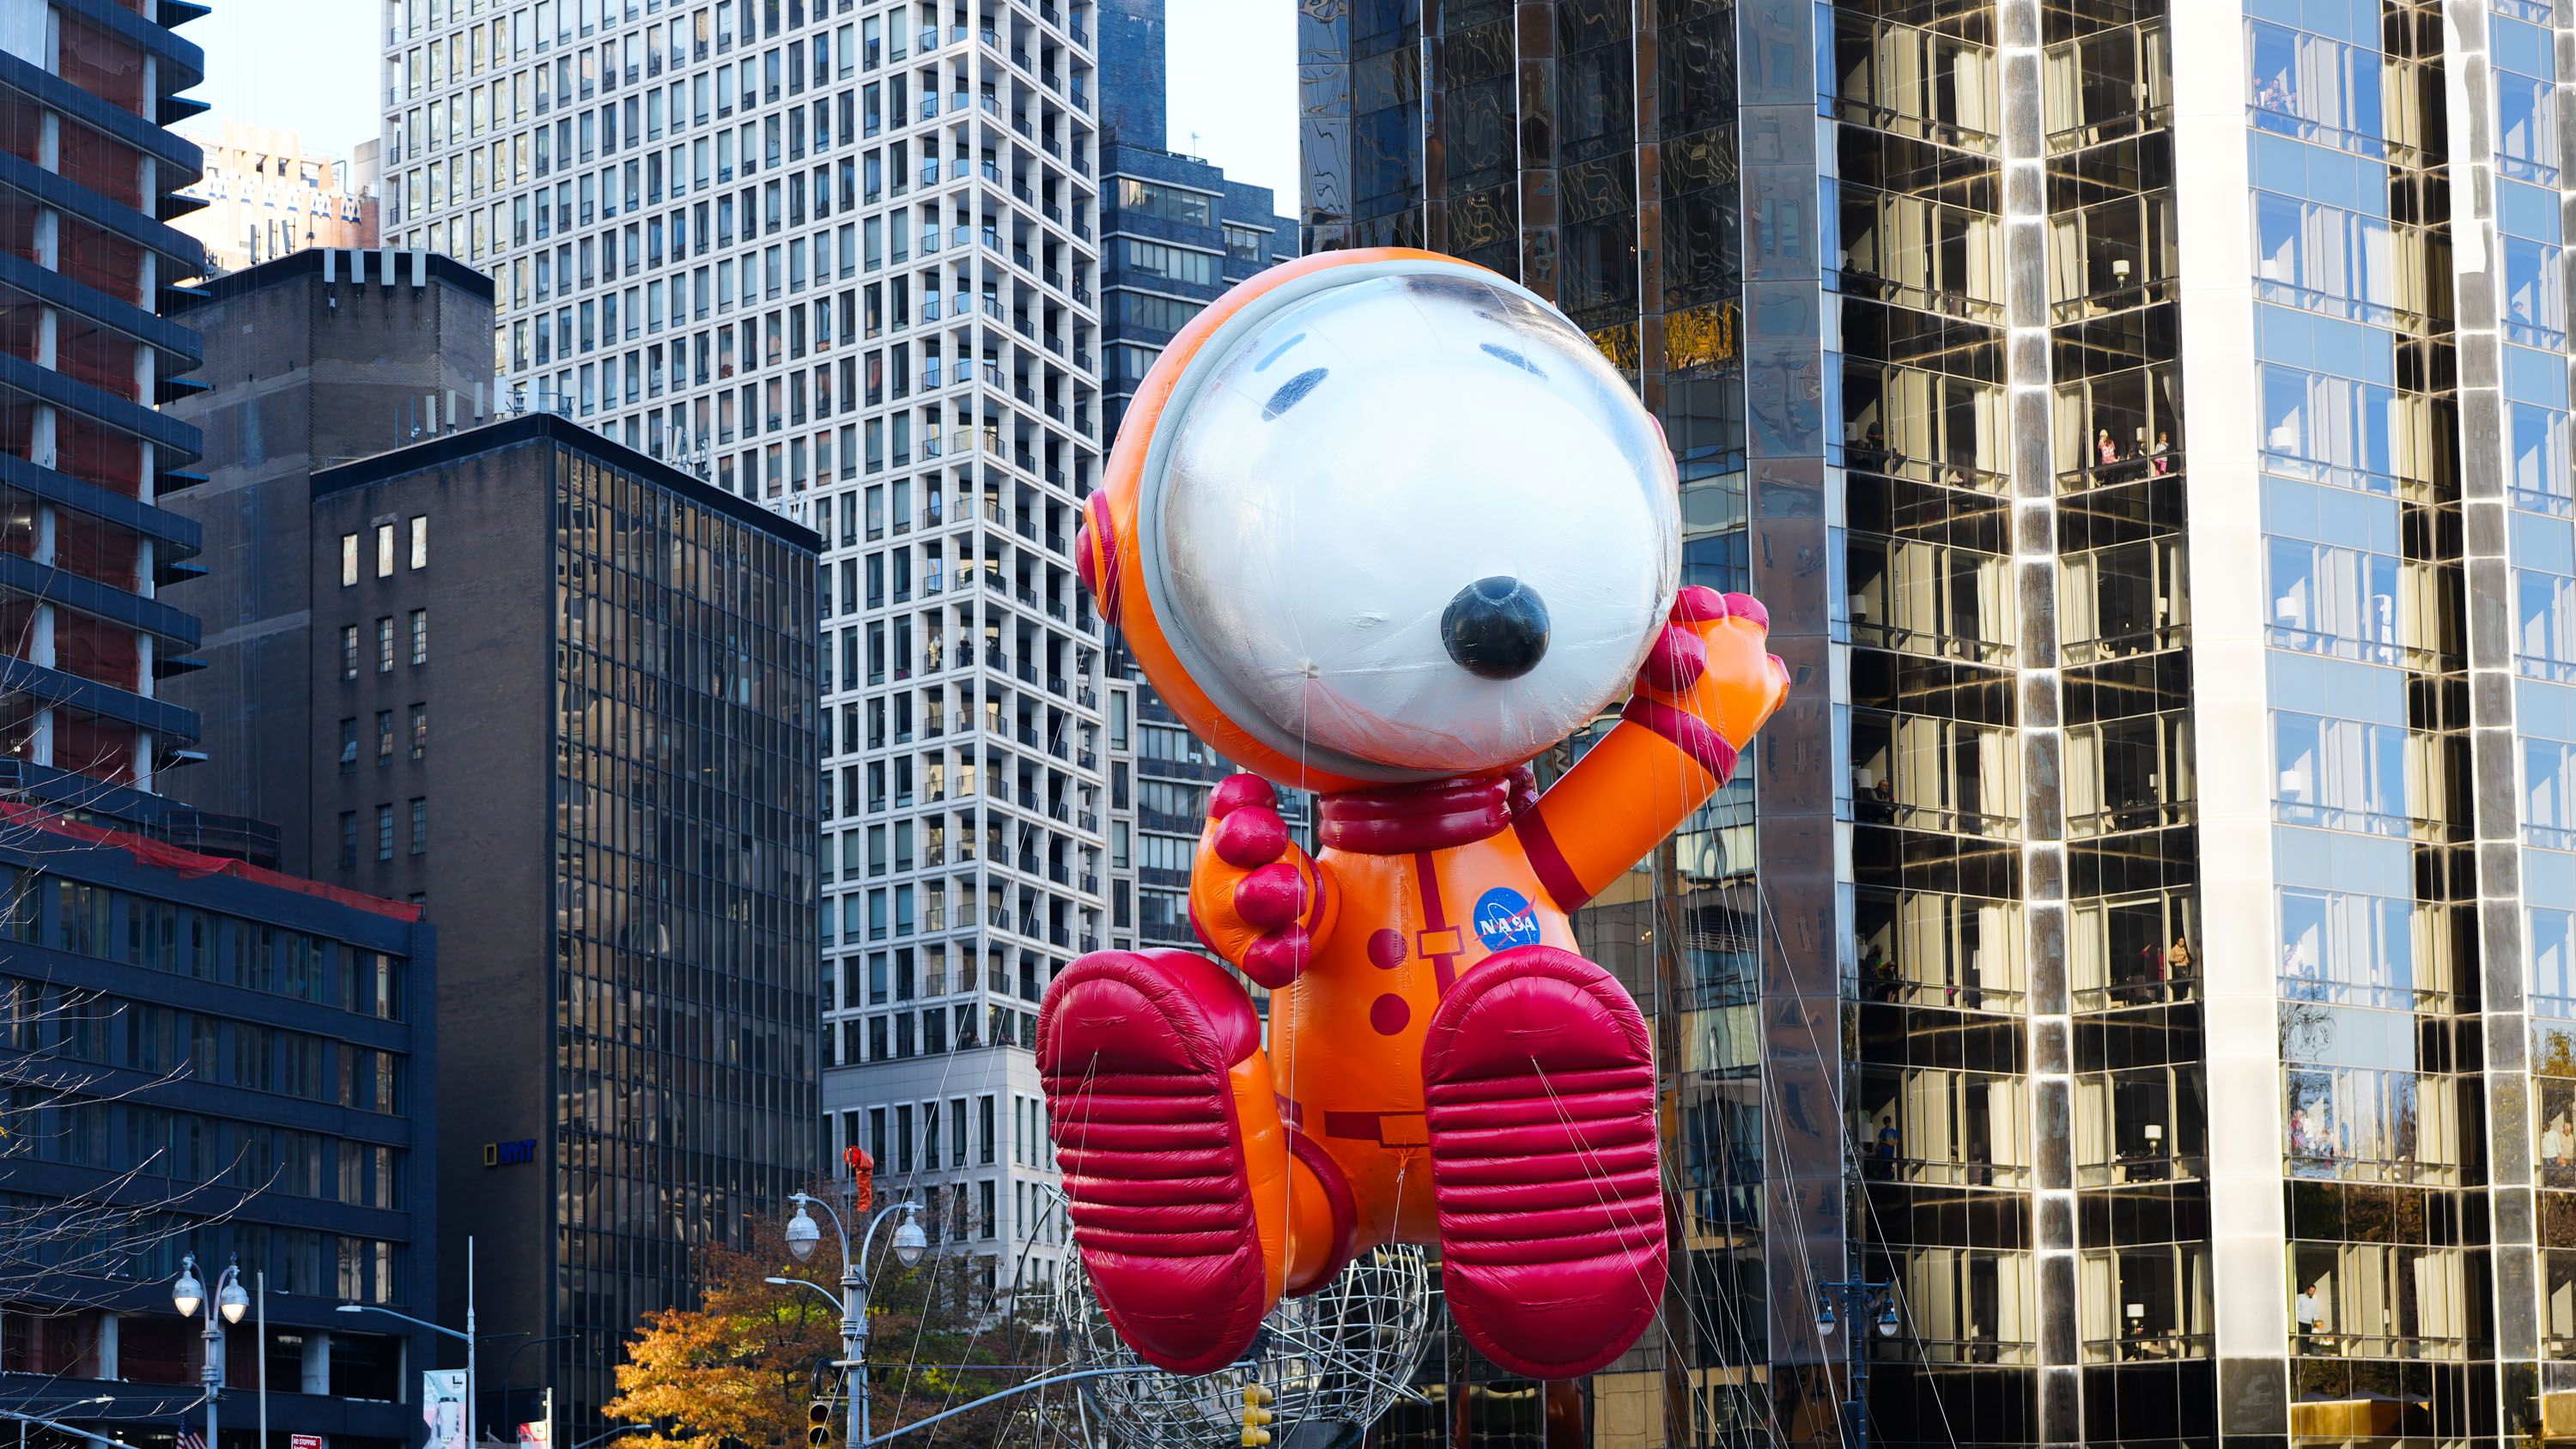 Macy's Thanksgiving Day Parade 2023: Performers, Lineup and More – WWD